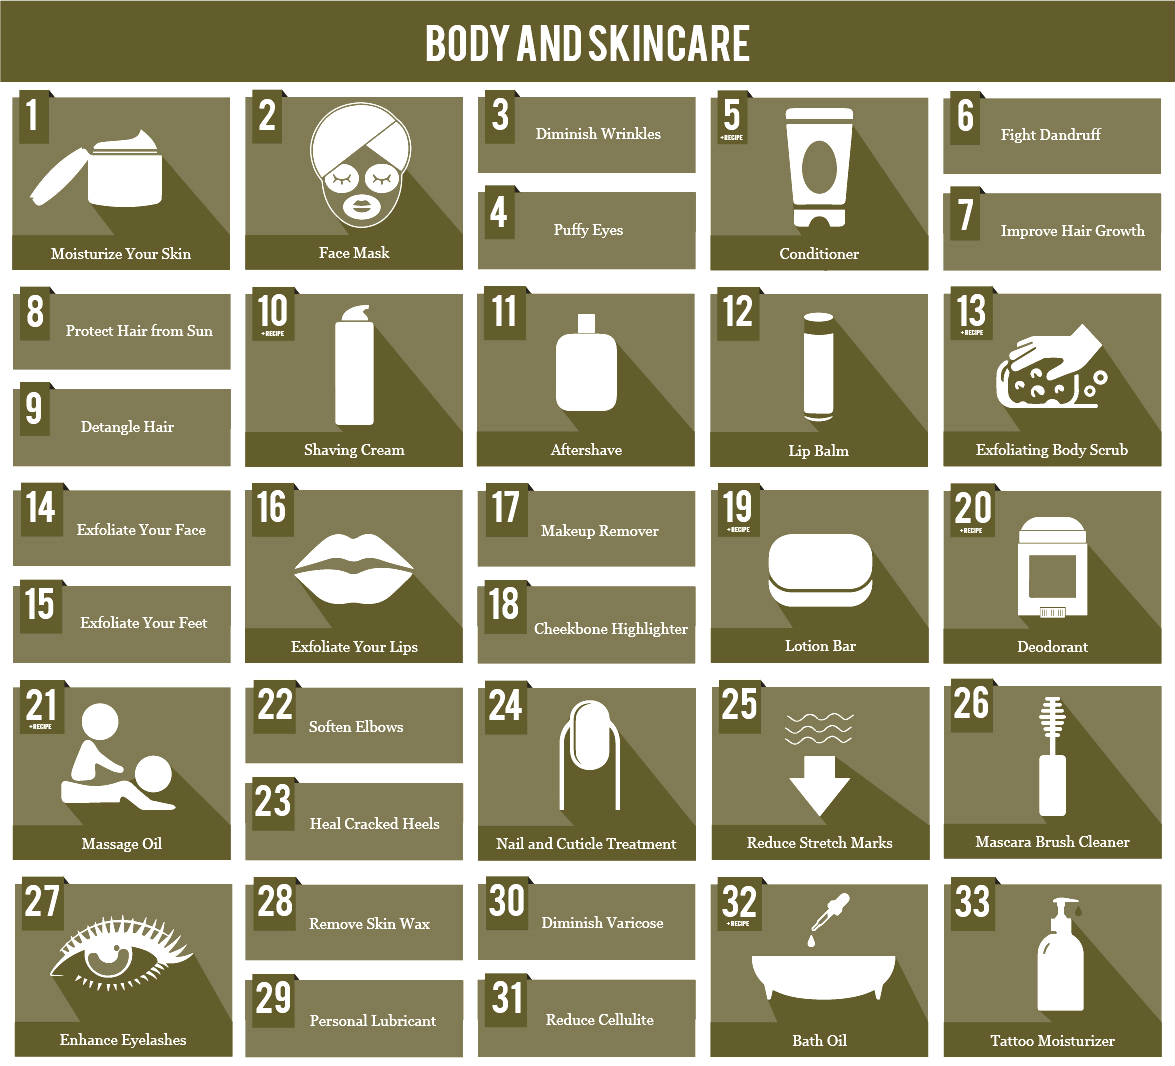 Body-And-Skincare_Image